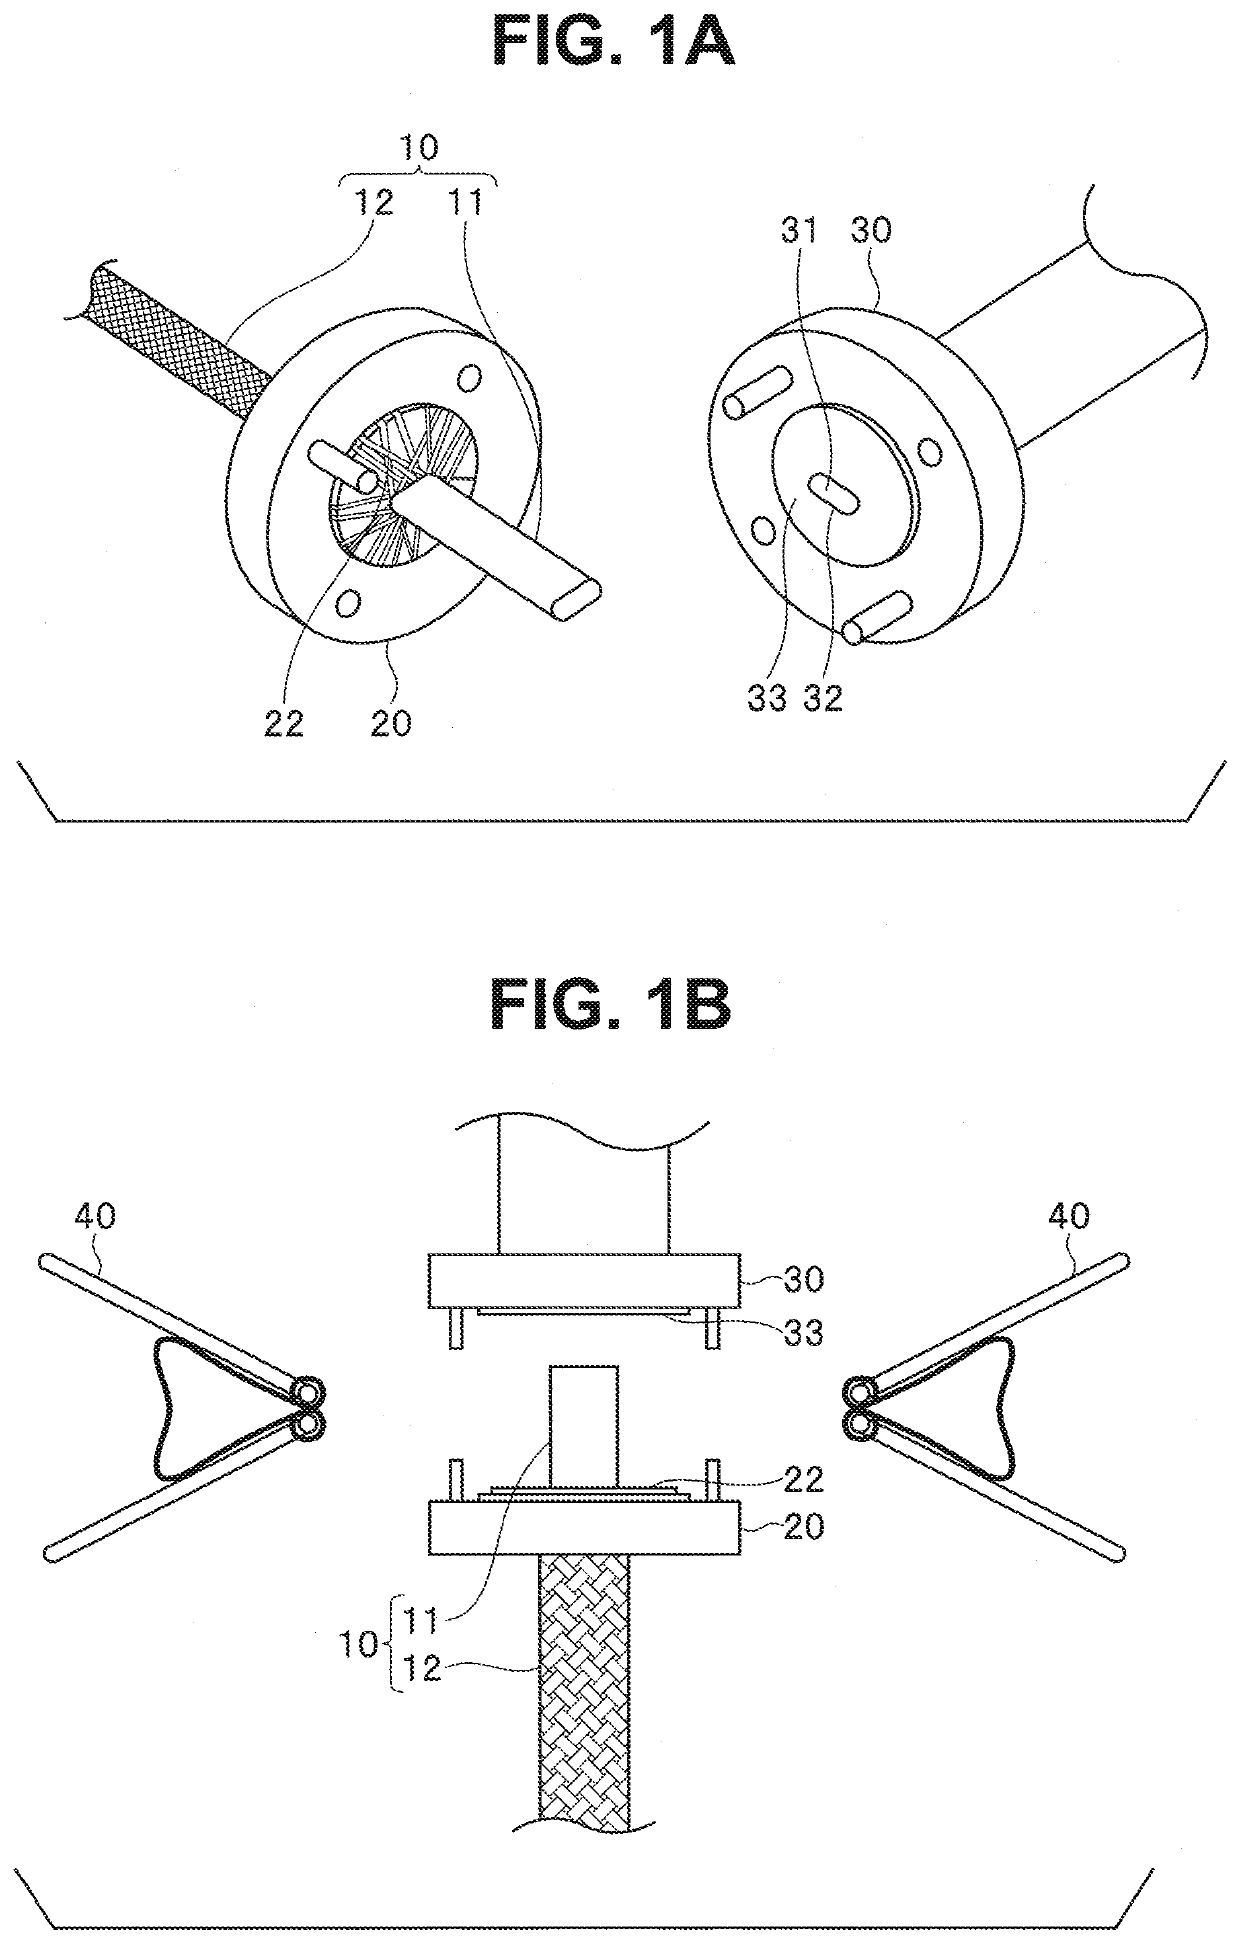 Connection structure of waveguide, waveguide connector, mode converter, and waveguide unit